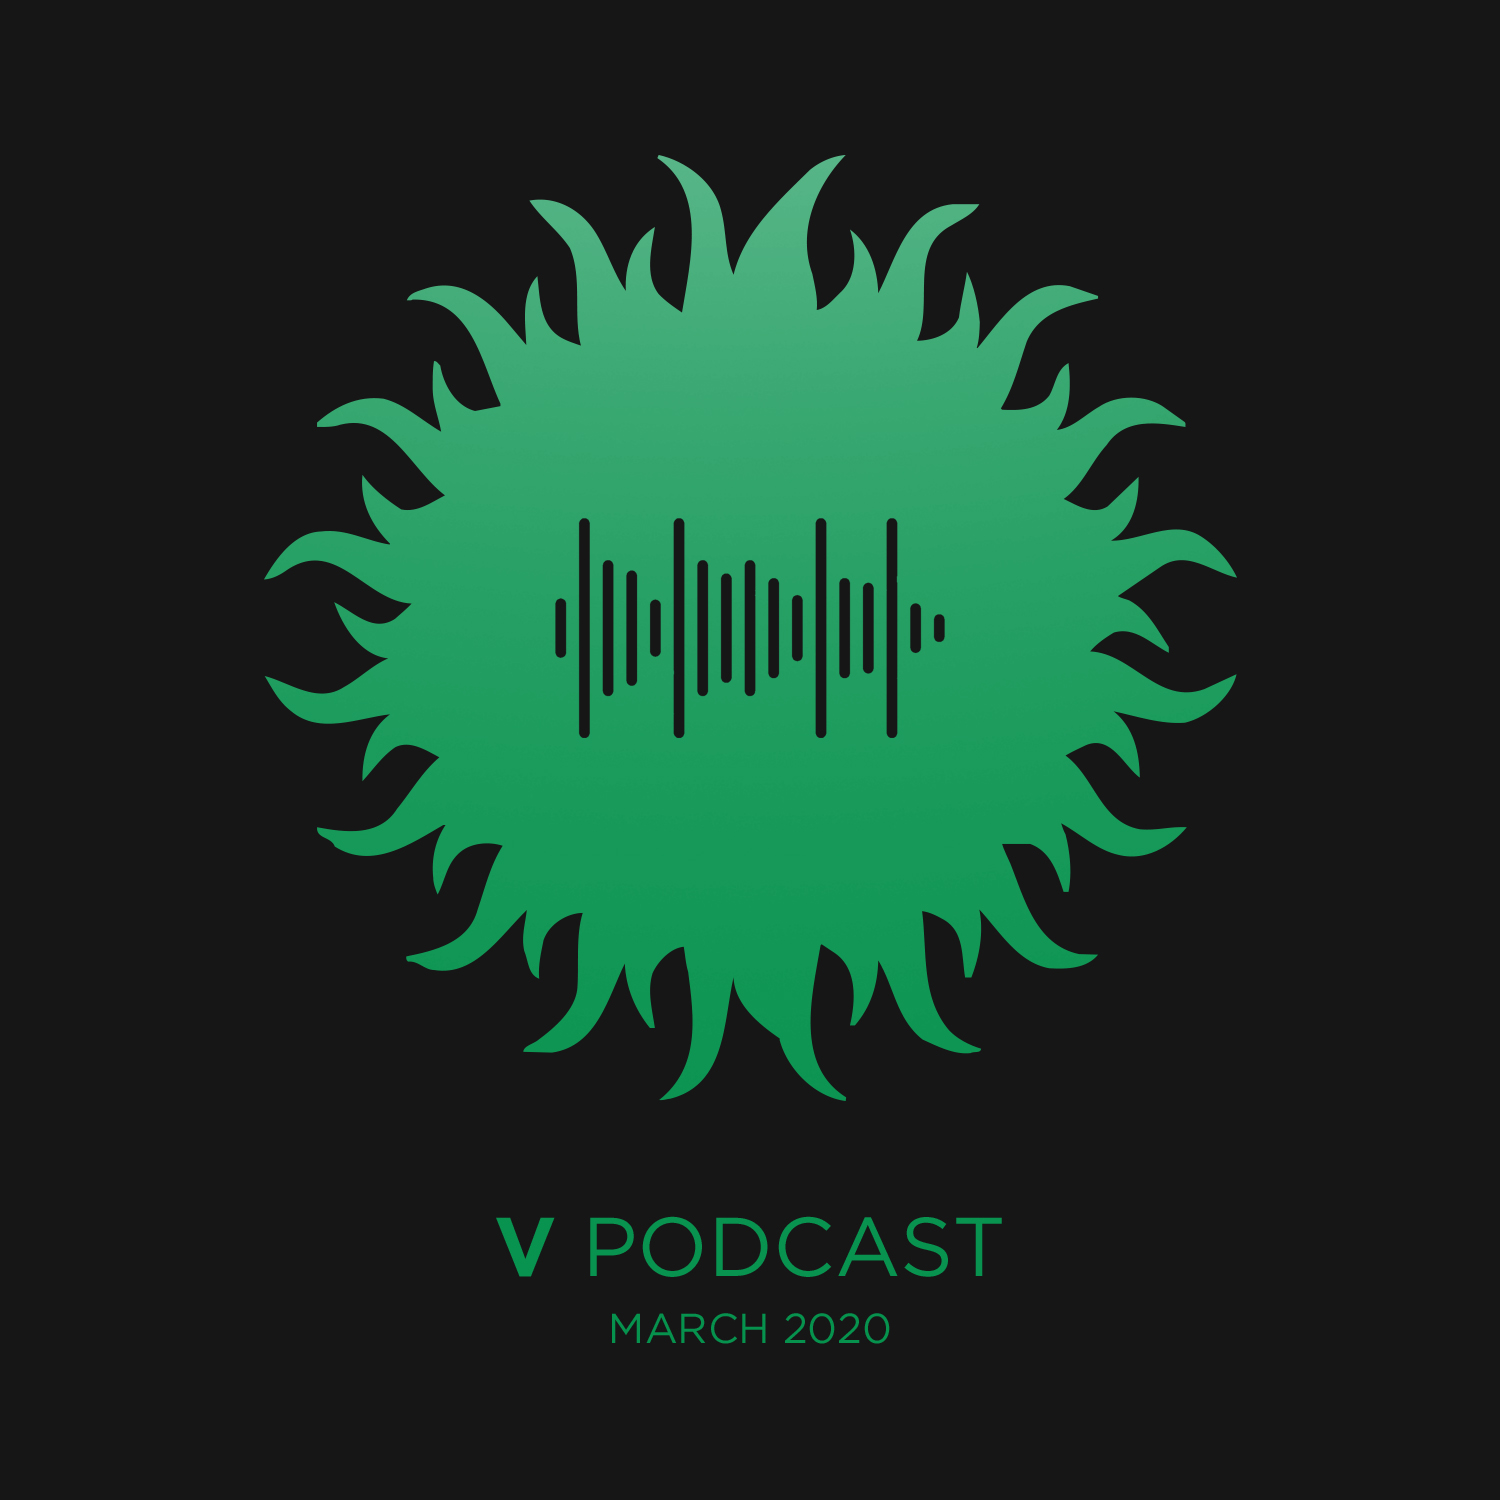 V Podcast 087 - Drum and Bass - hosted by Bryan Gee Artwork